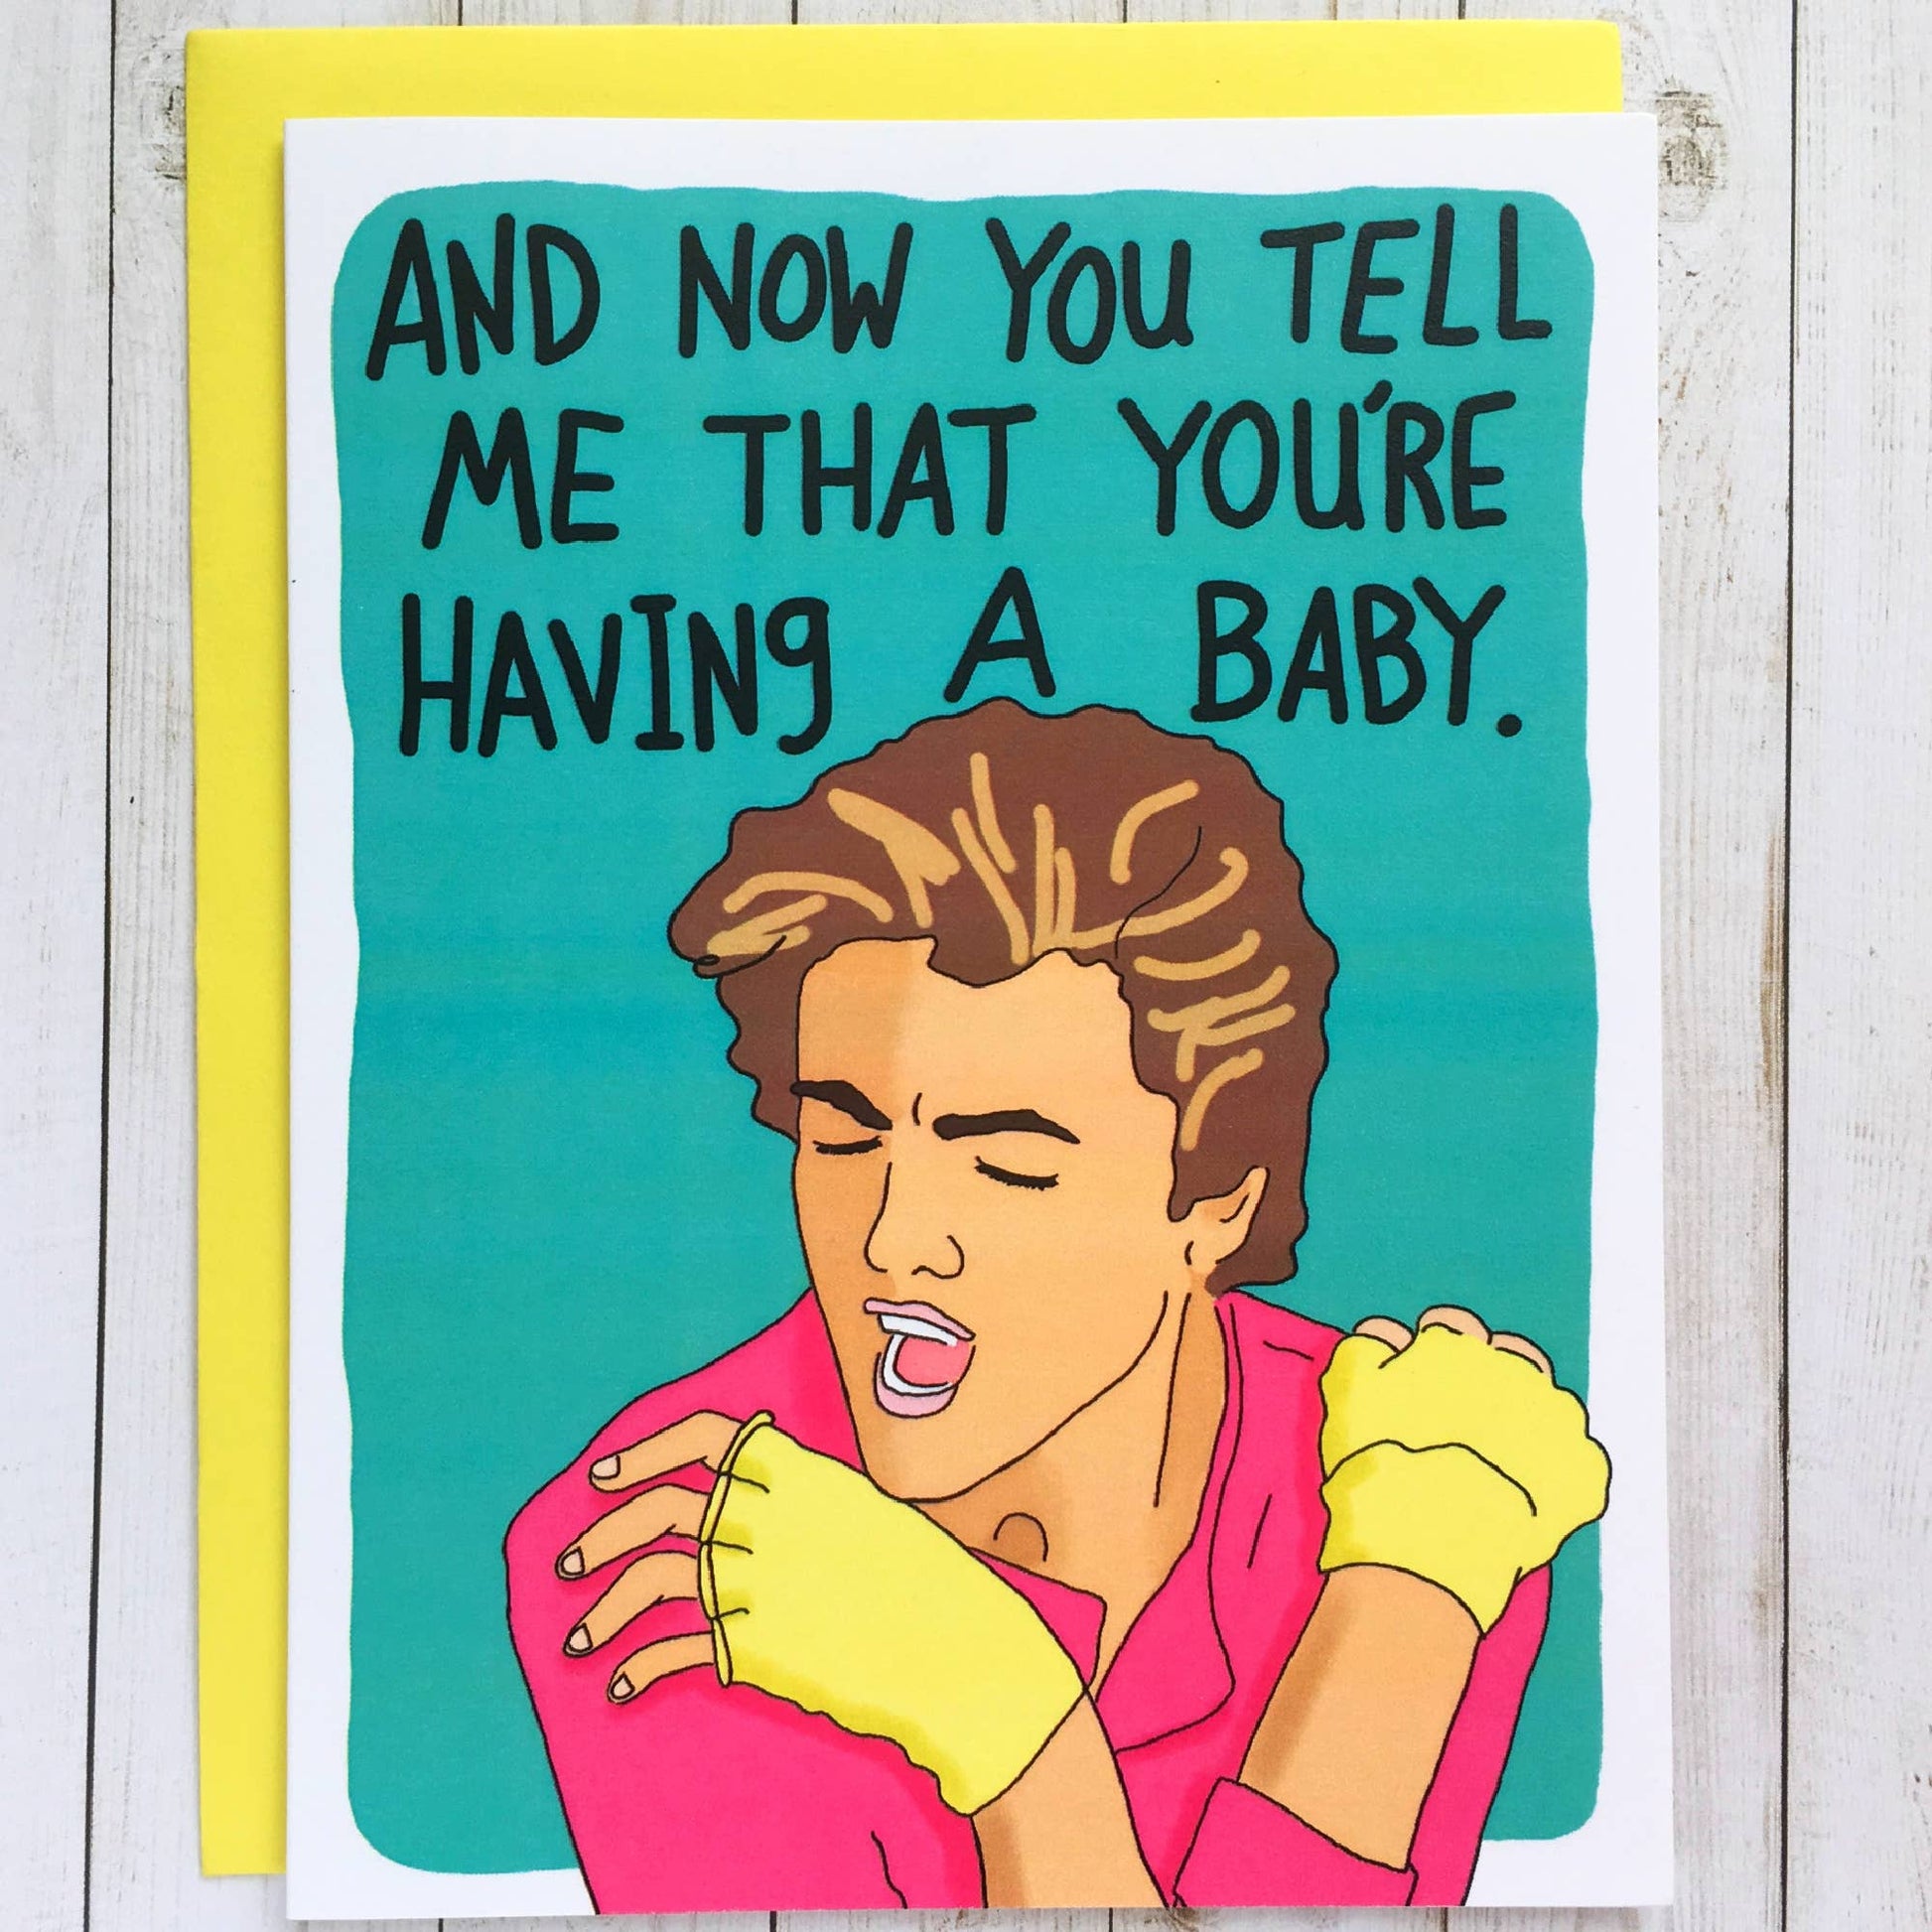 Having A Baby George Michael '80s Funny Baby Card